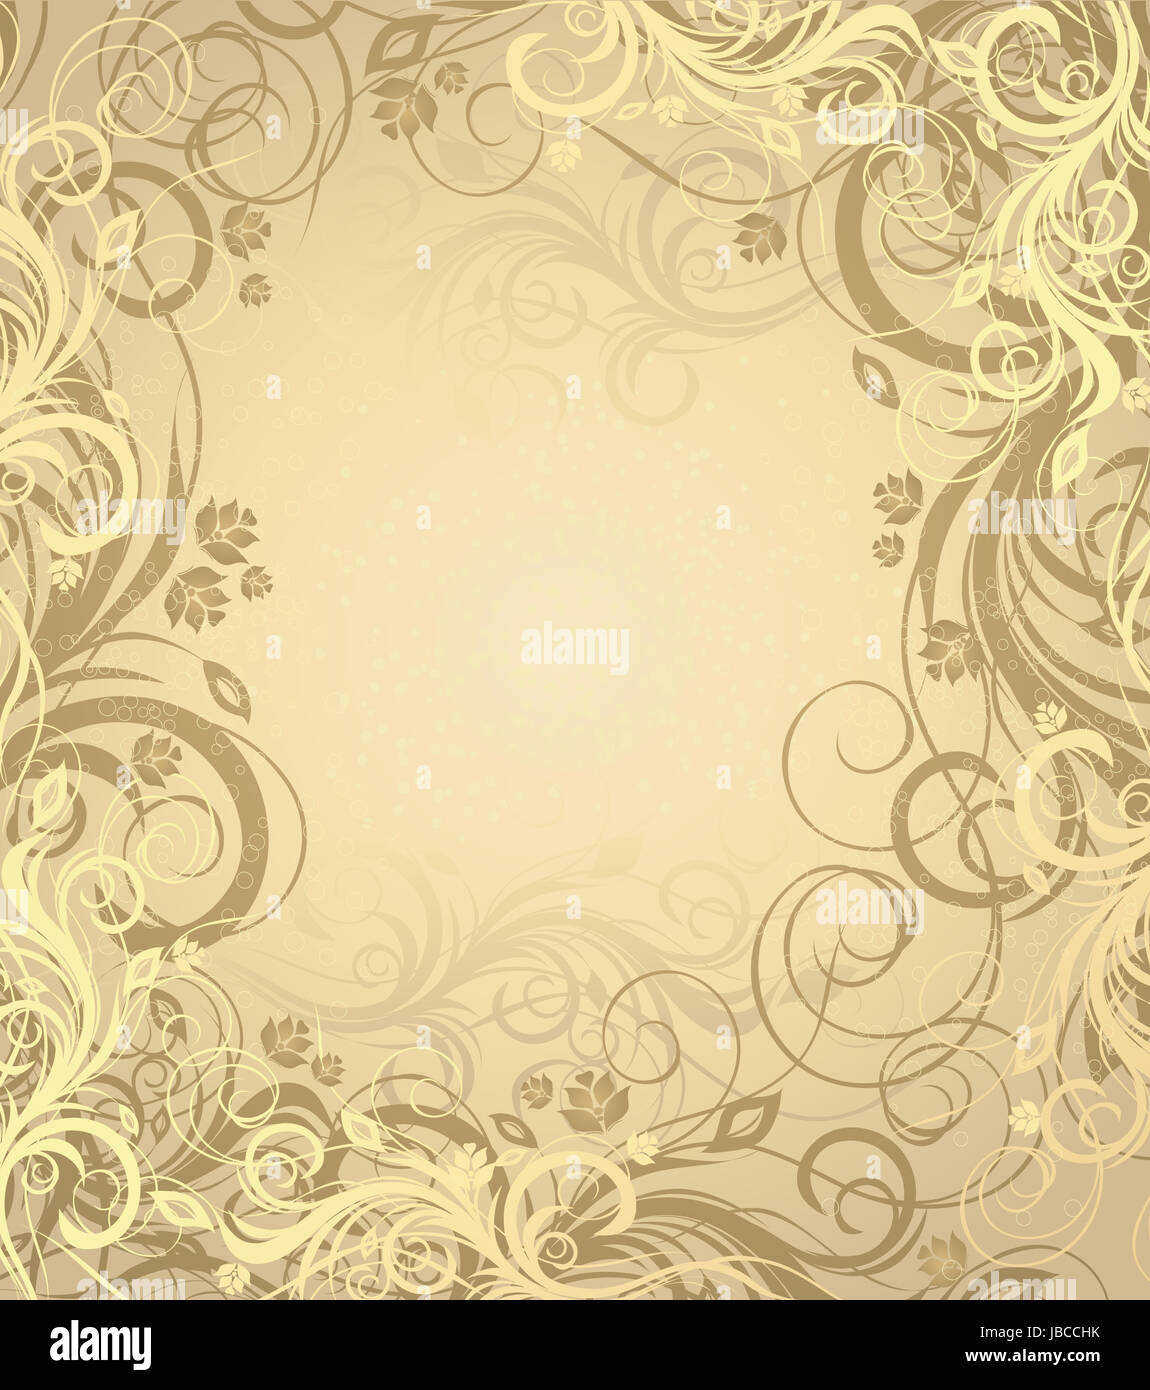 Vector gold and brown floral background with pattern Stock Photo - Alamy